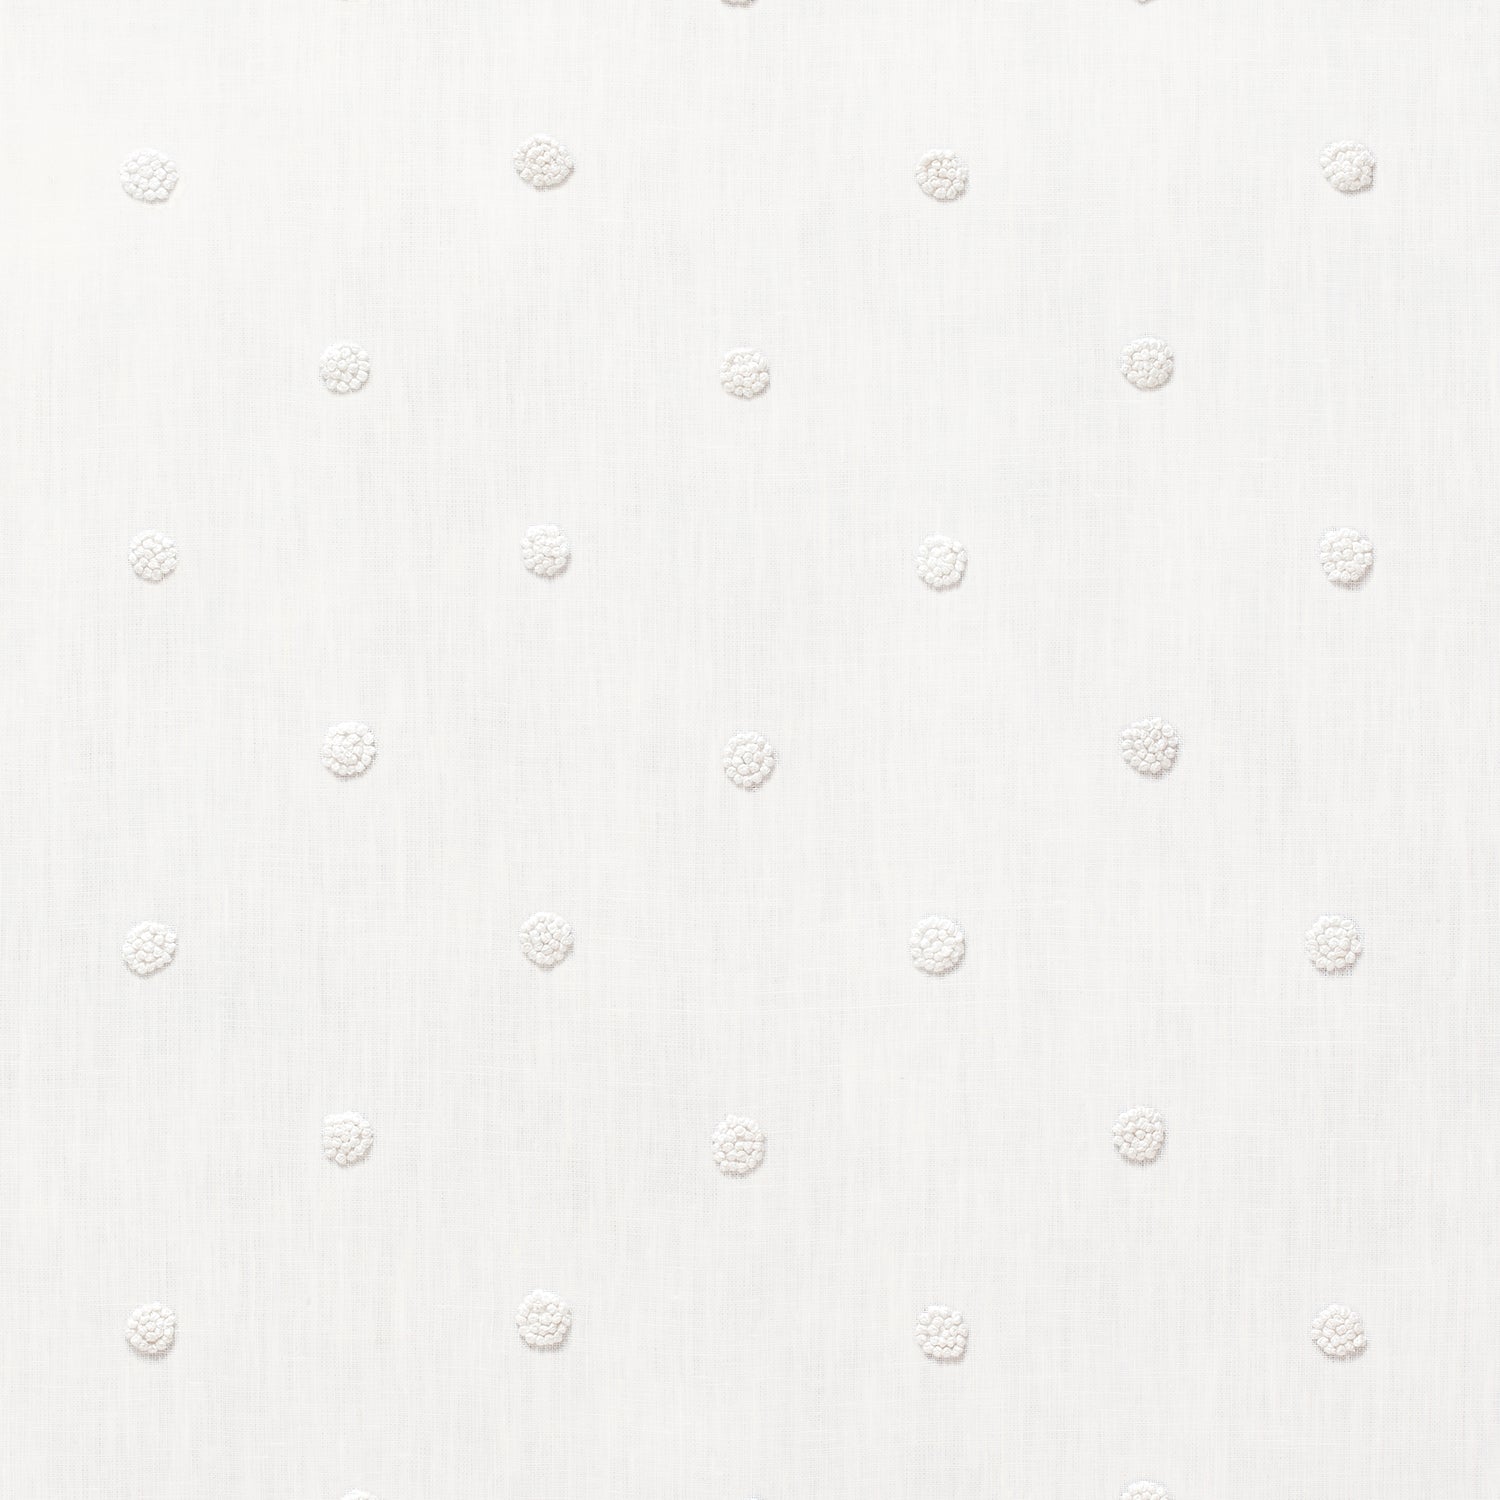 French Knot Embroidery fabric in white color - pattern number AW73010 - by Anna French in the Meridian collection